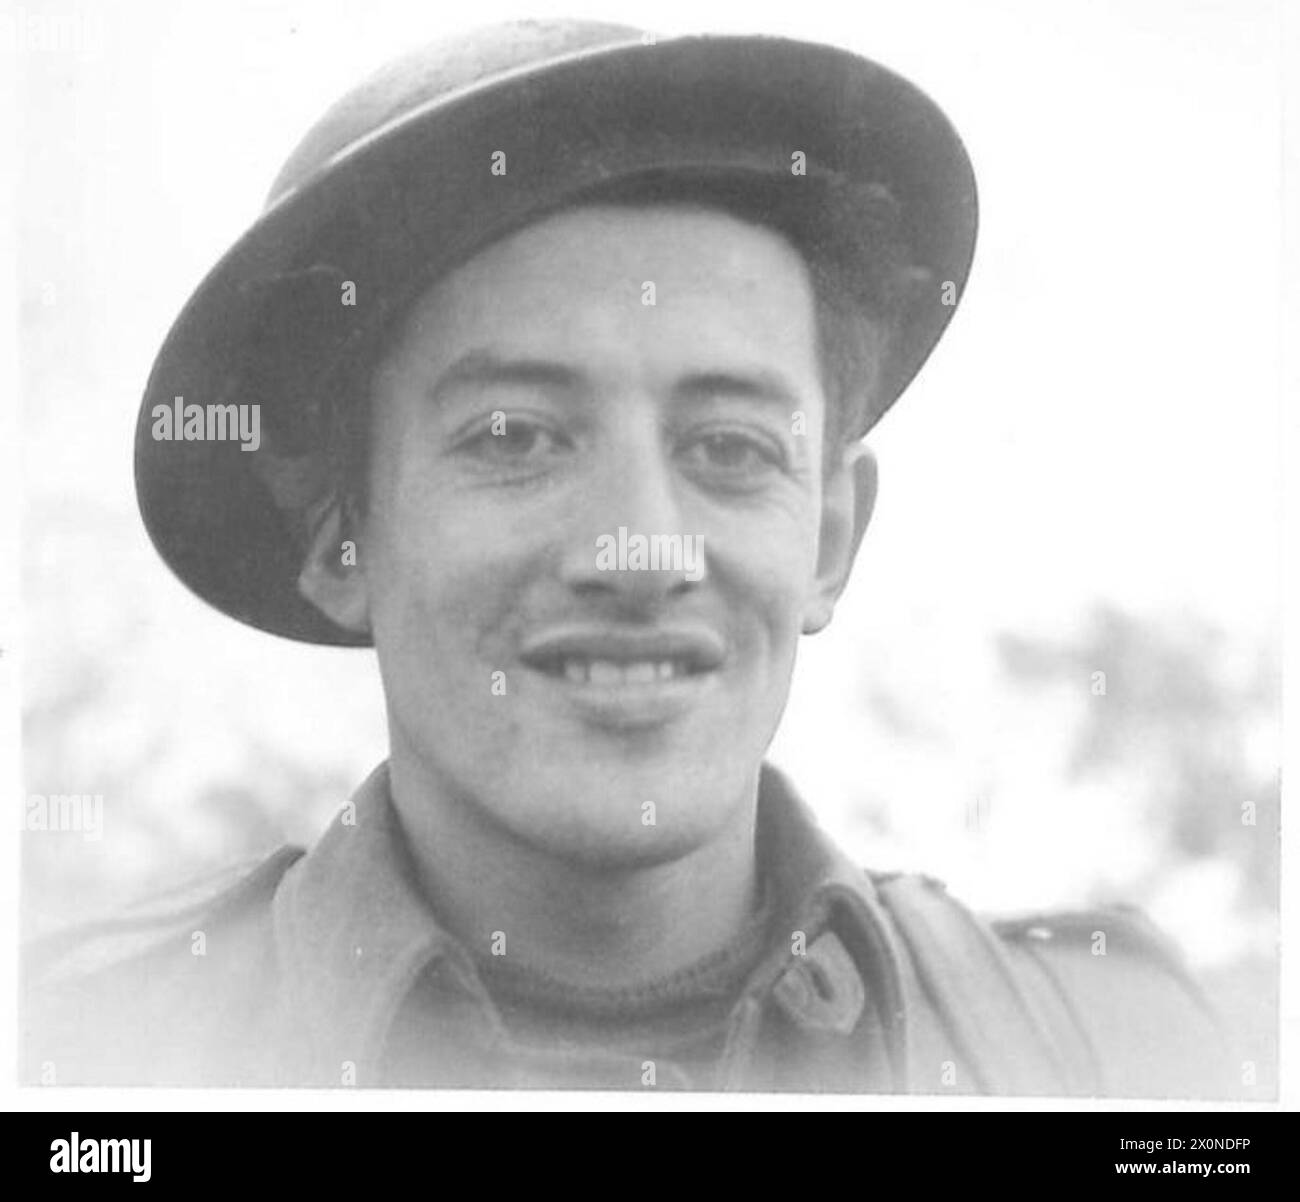 ITALY : FIFTH ARMYSPOT LIGHT ON THE KIWIS - A Maori Infantryman - Pte. Paul Pottiki, a 25 year old man from Setoun, Wellington, N.Z. Formerly a civil servant and played rugby for Peneke, represented Killbimie at cricket 'We can and will do it'. Photographic negative , British Army Stock Photo